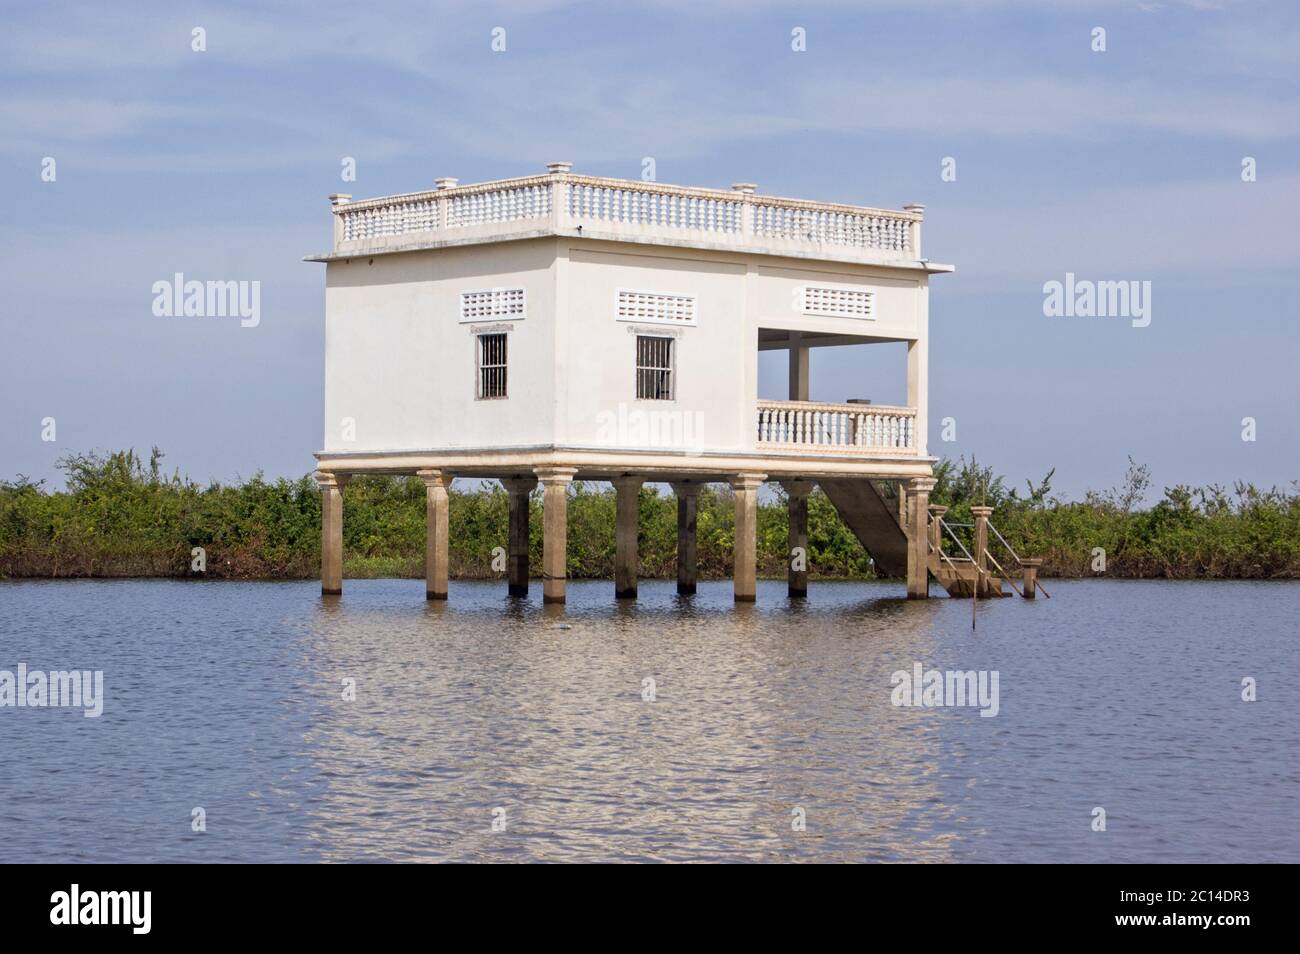 A traditional stucco villa built high on stilts in the floating village of Kompong Phluk on the Tonle Sap lake, Cambodia. Stock Photo